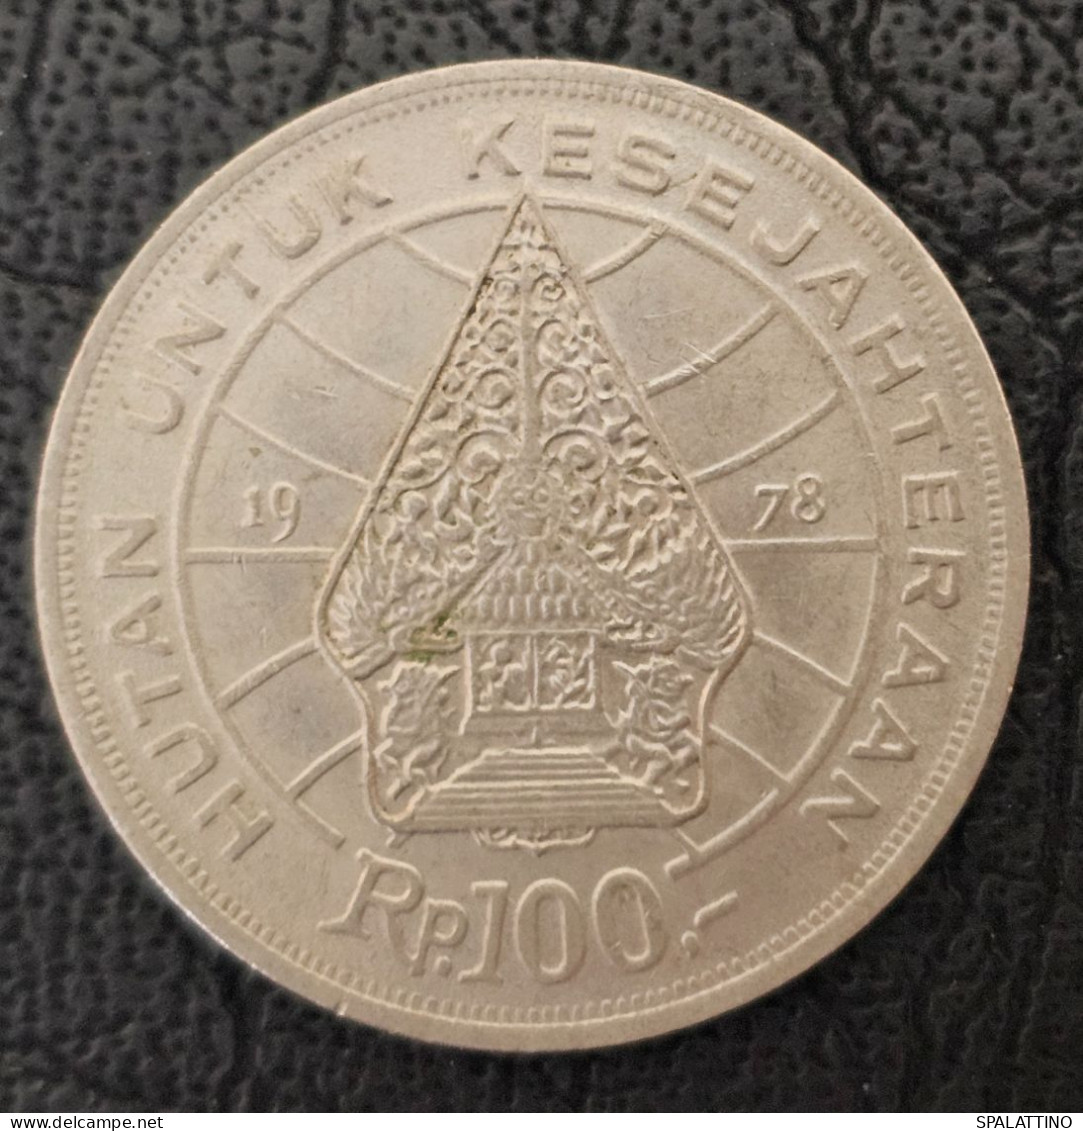 INDONESIA- 100 RUPIAH 1978. FORESTRY FOR PROSPERITY - Indonesien